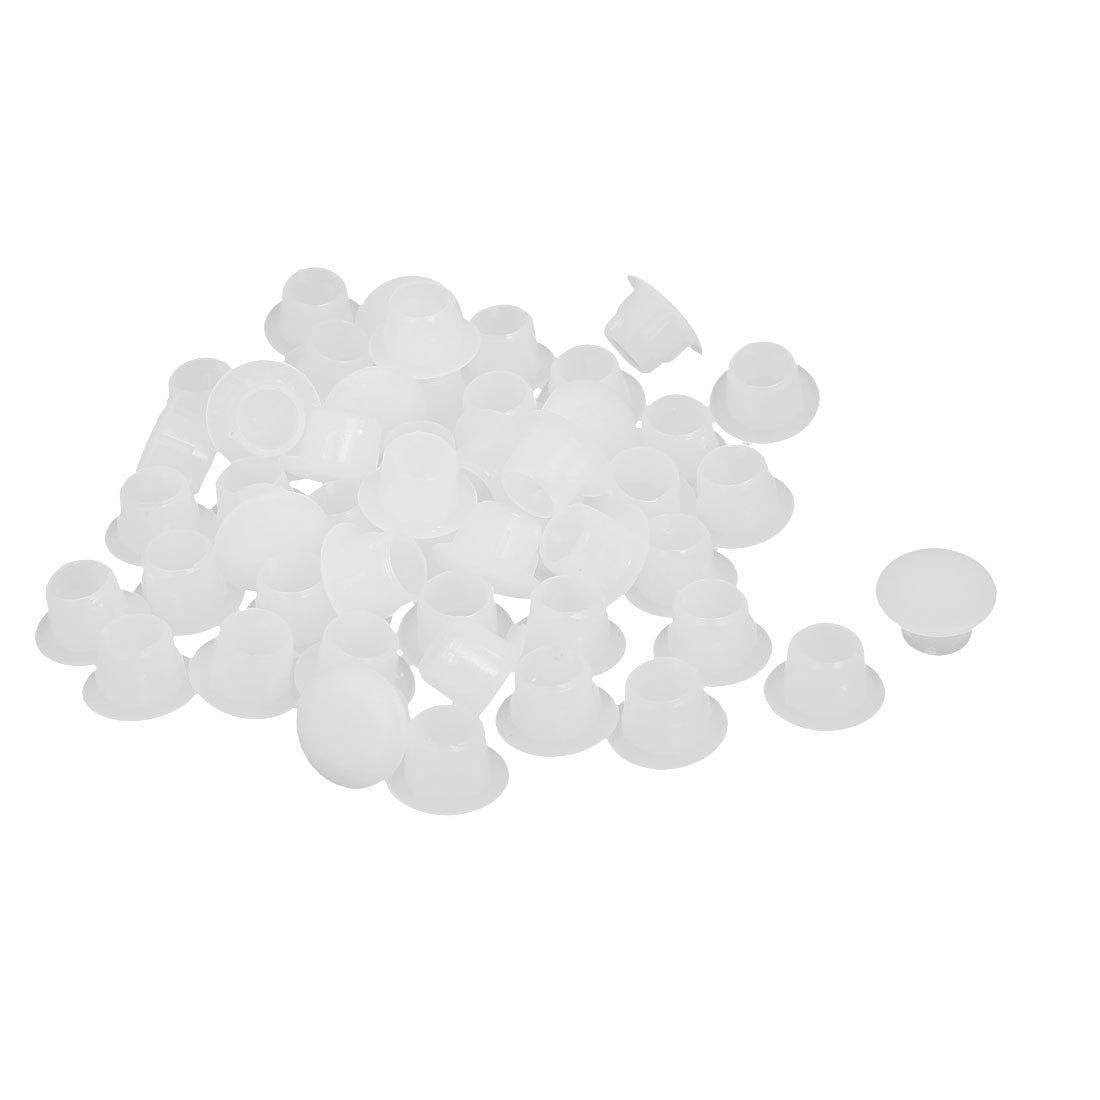 uxcell Uxcell 8mm Dia Plastic Straight Line Screw Cap Covers Hole Lids White 50pcs